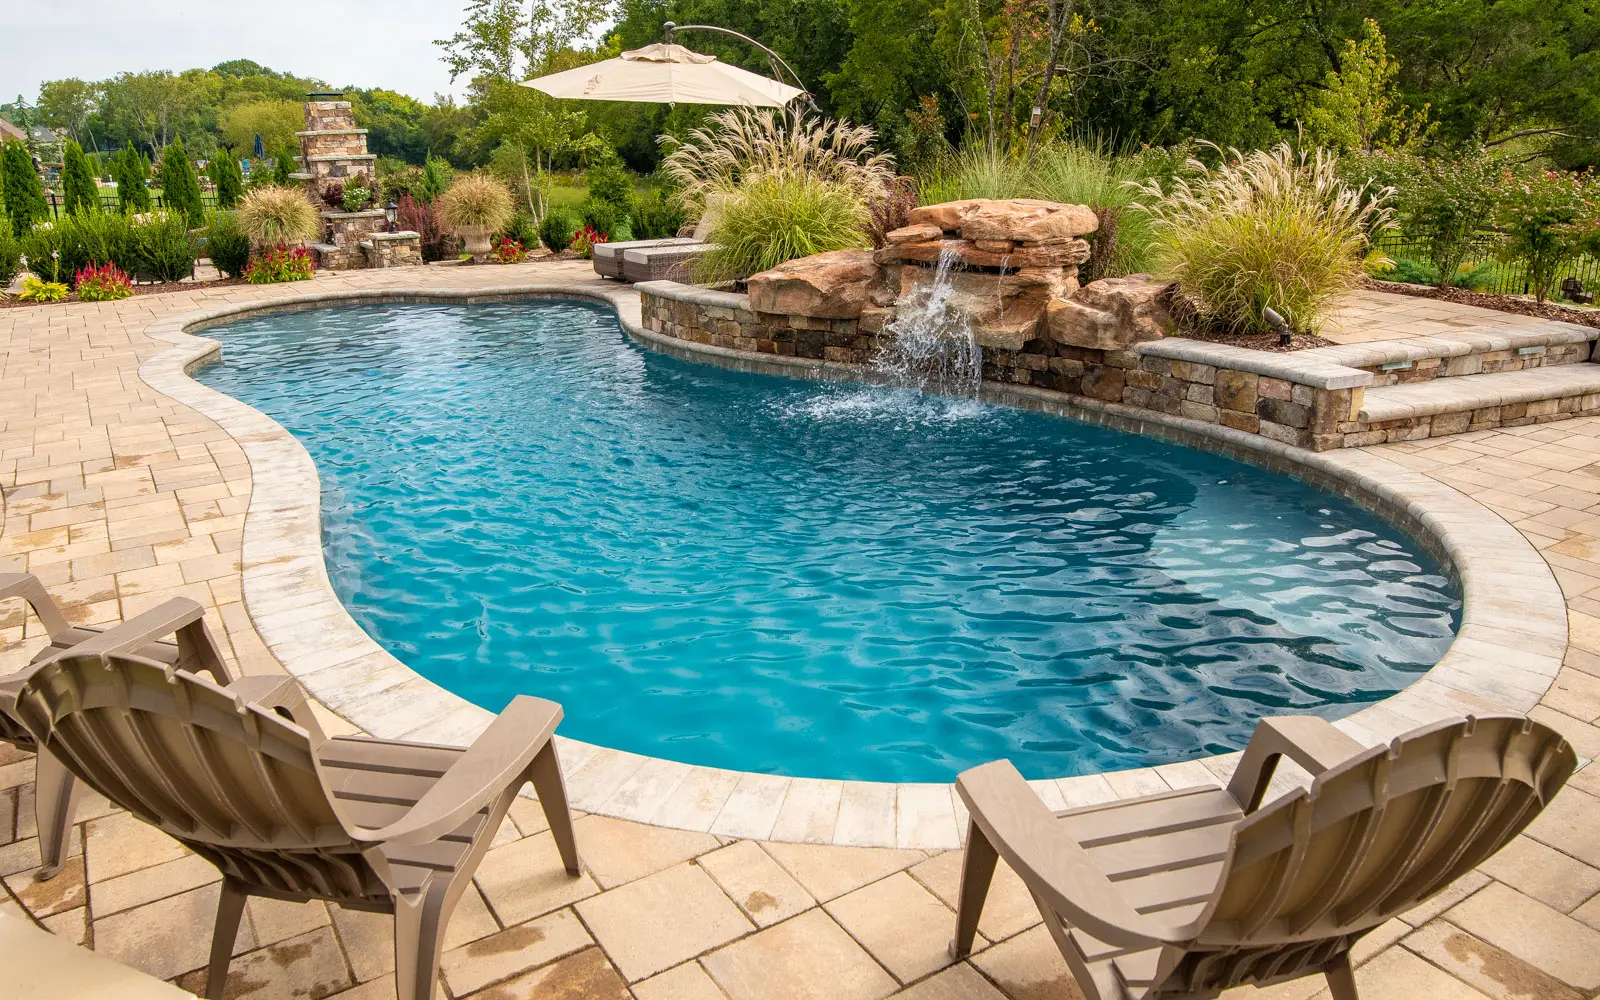 The Pool Company is a fiberglass pool builder in greater Beaufort, South Carolina